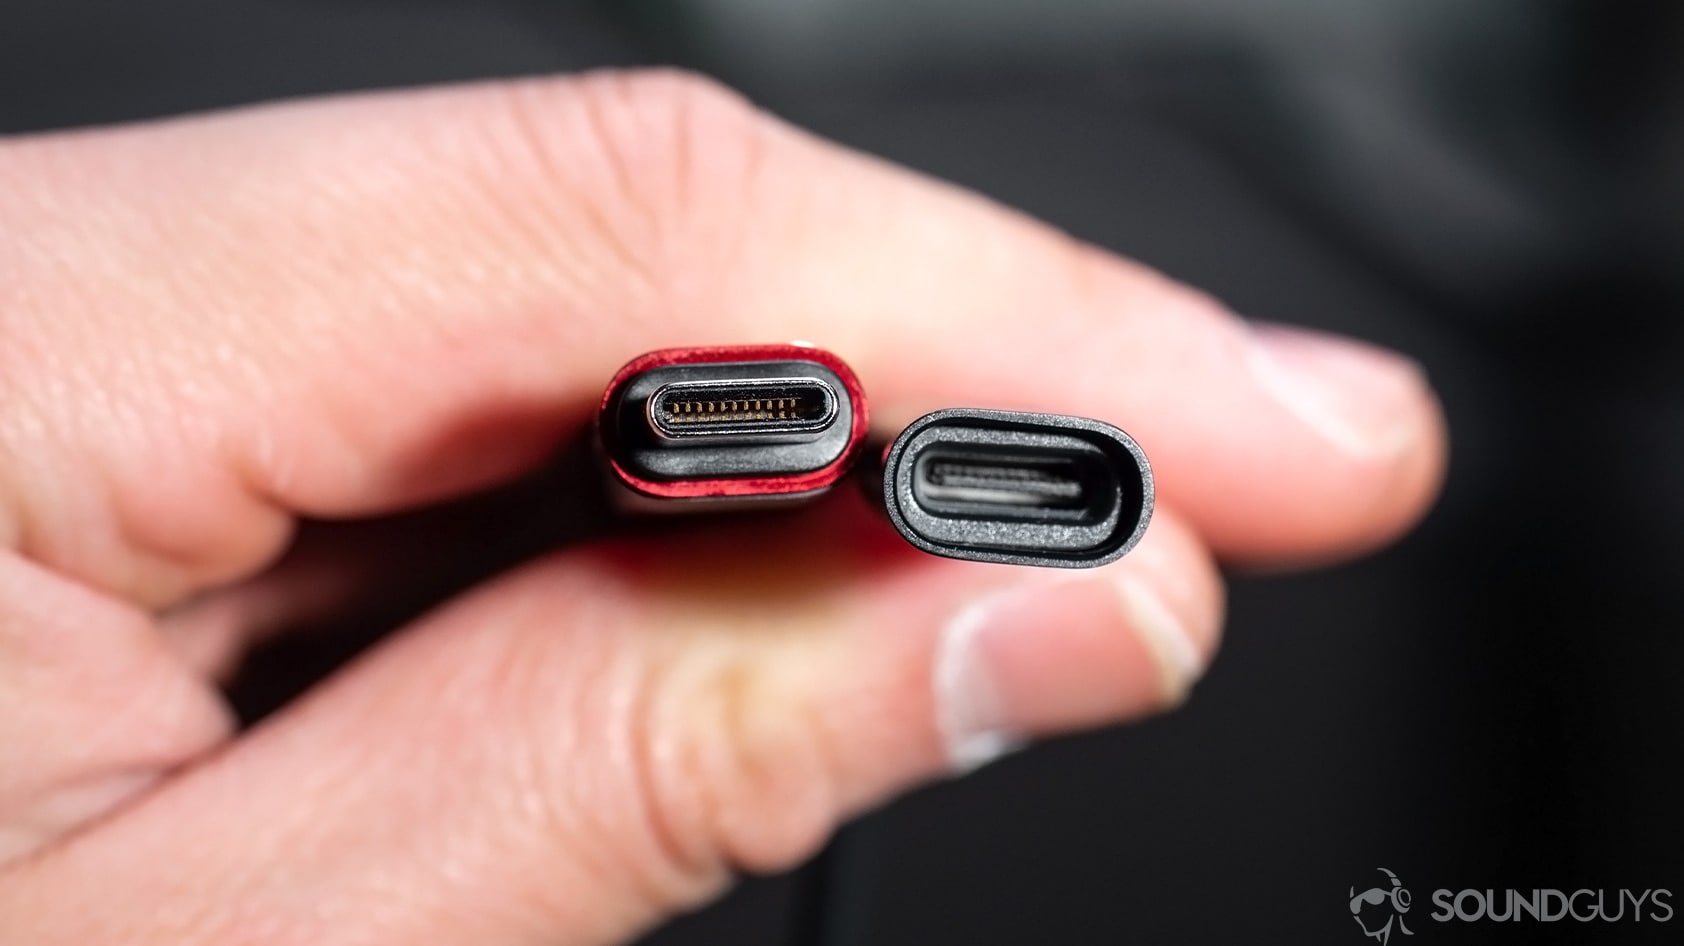 Huawei Freelace: A close-up of the USB-C module built into the neckband. The pieces are held in a hand to show the male and female ends.